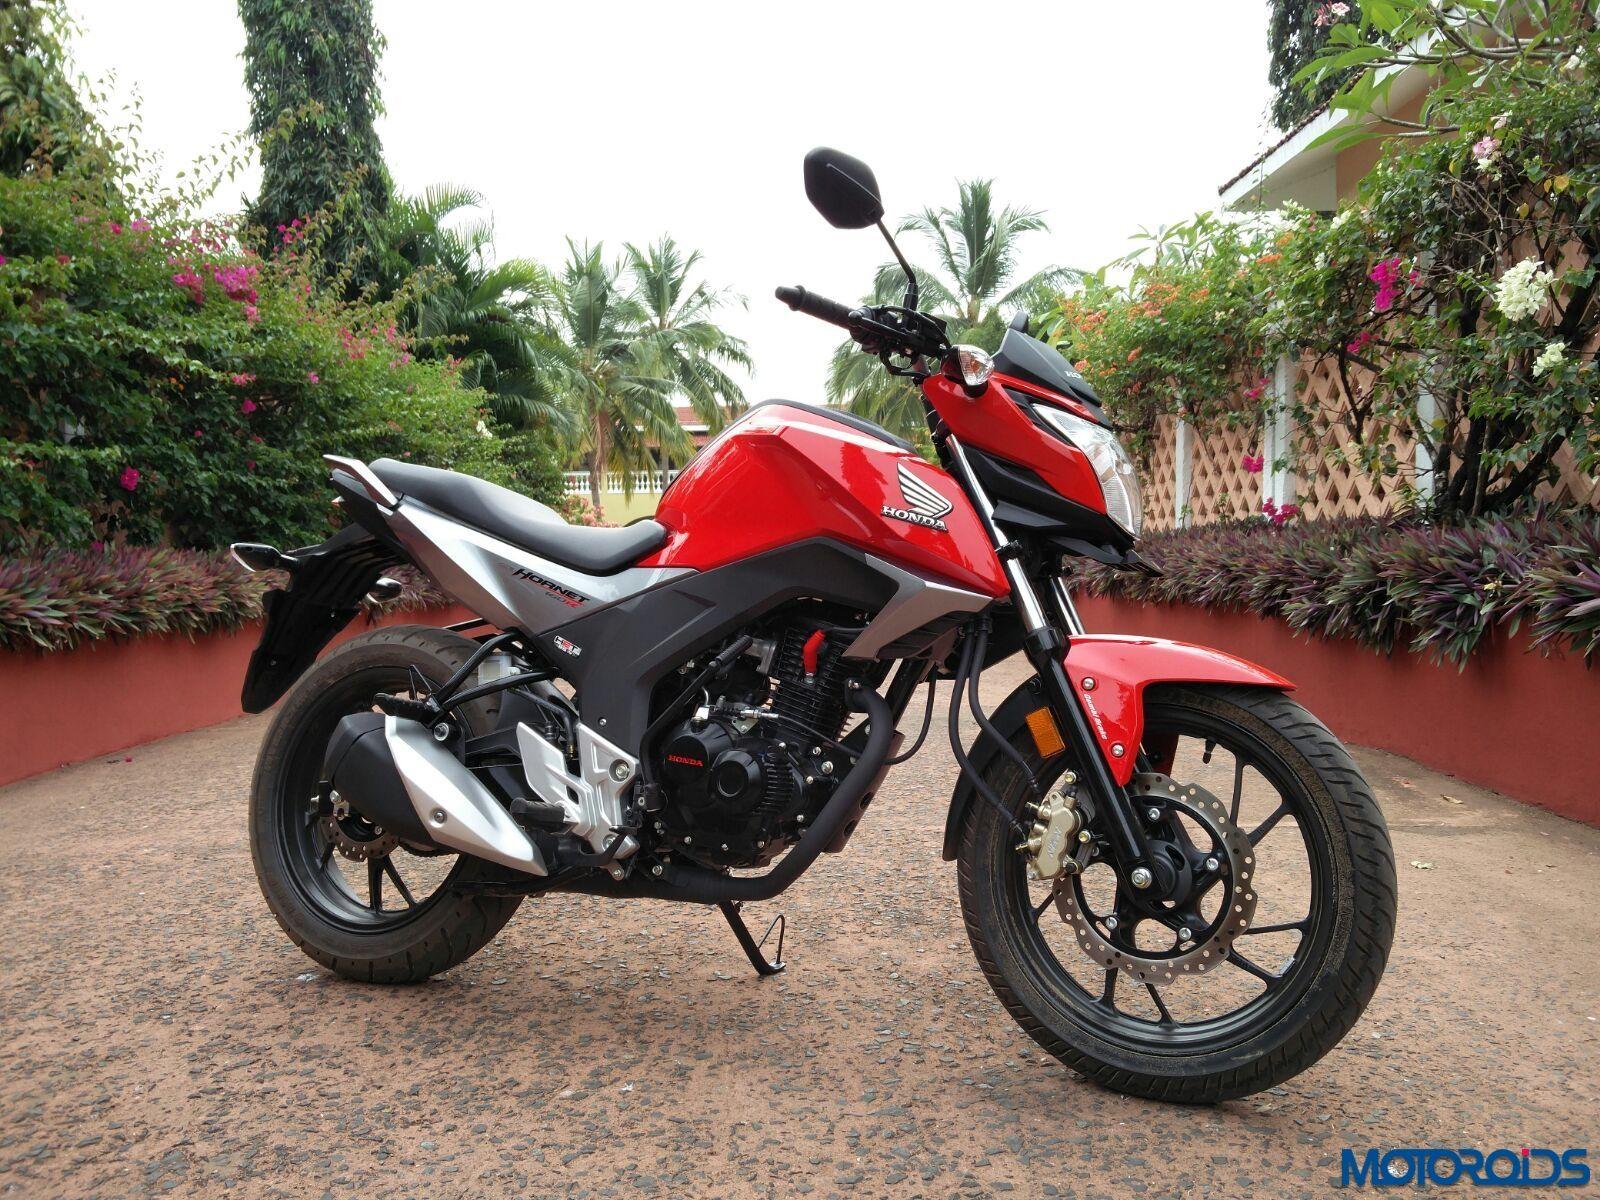 Honda CB Hornet 160R first ride review, image, specs and details